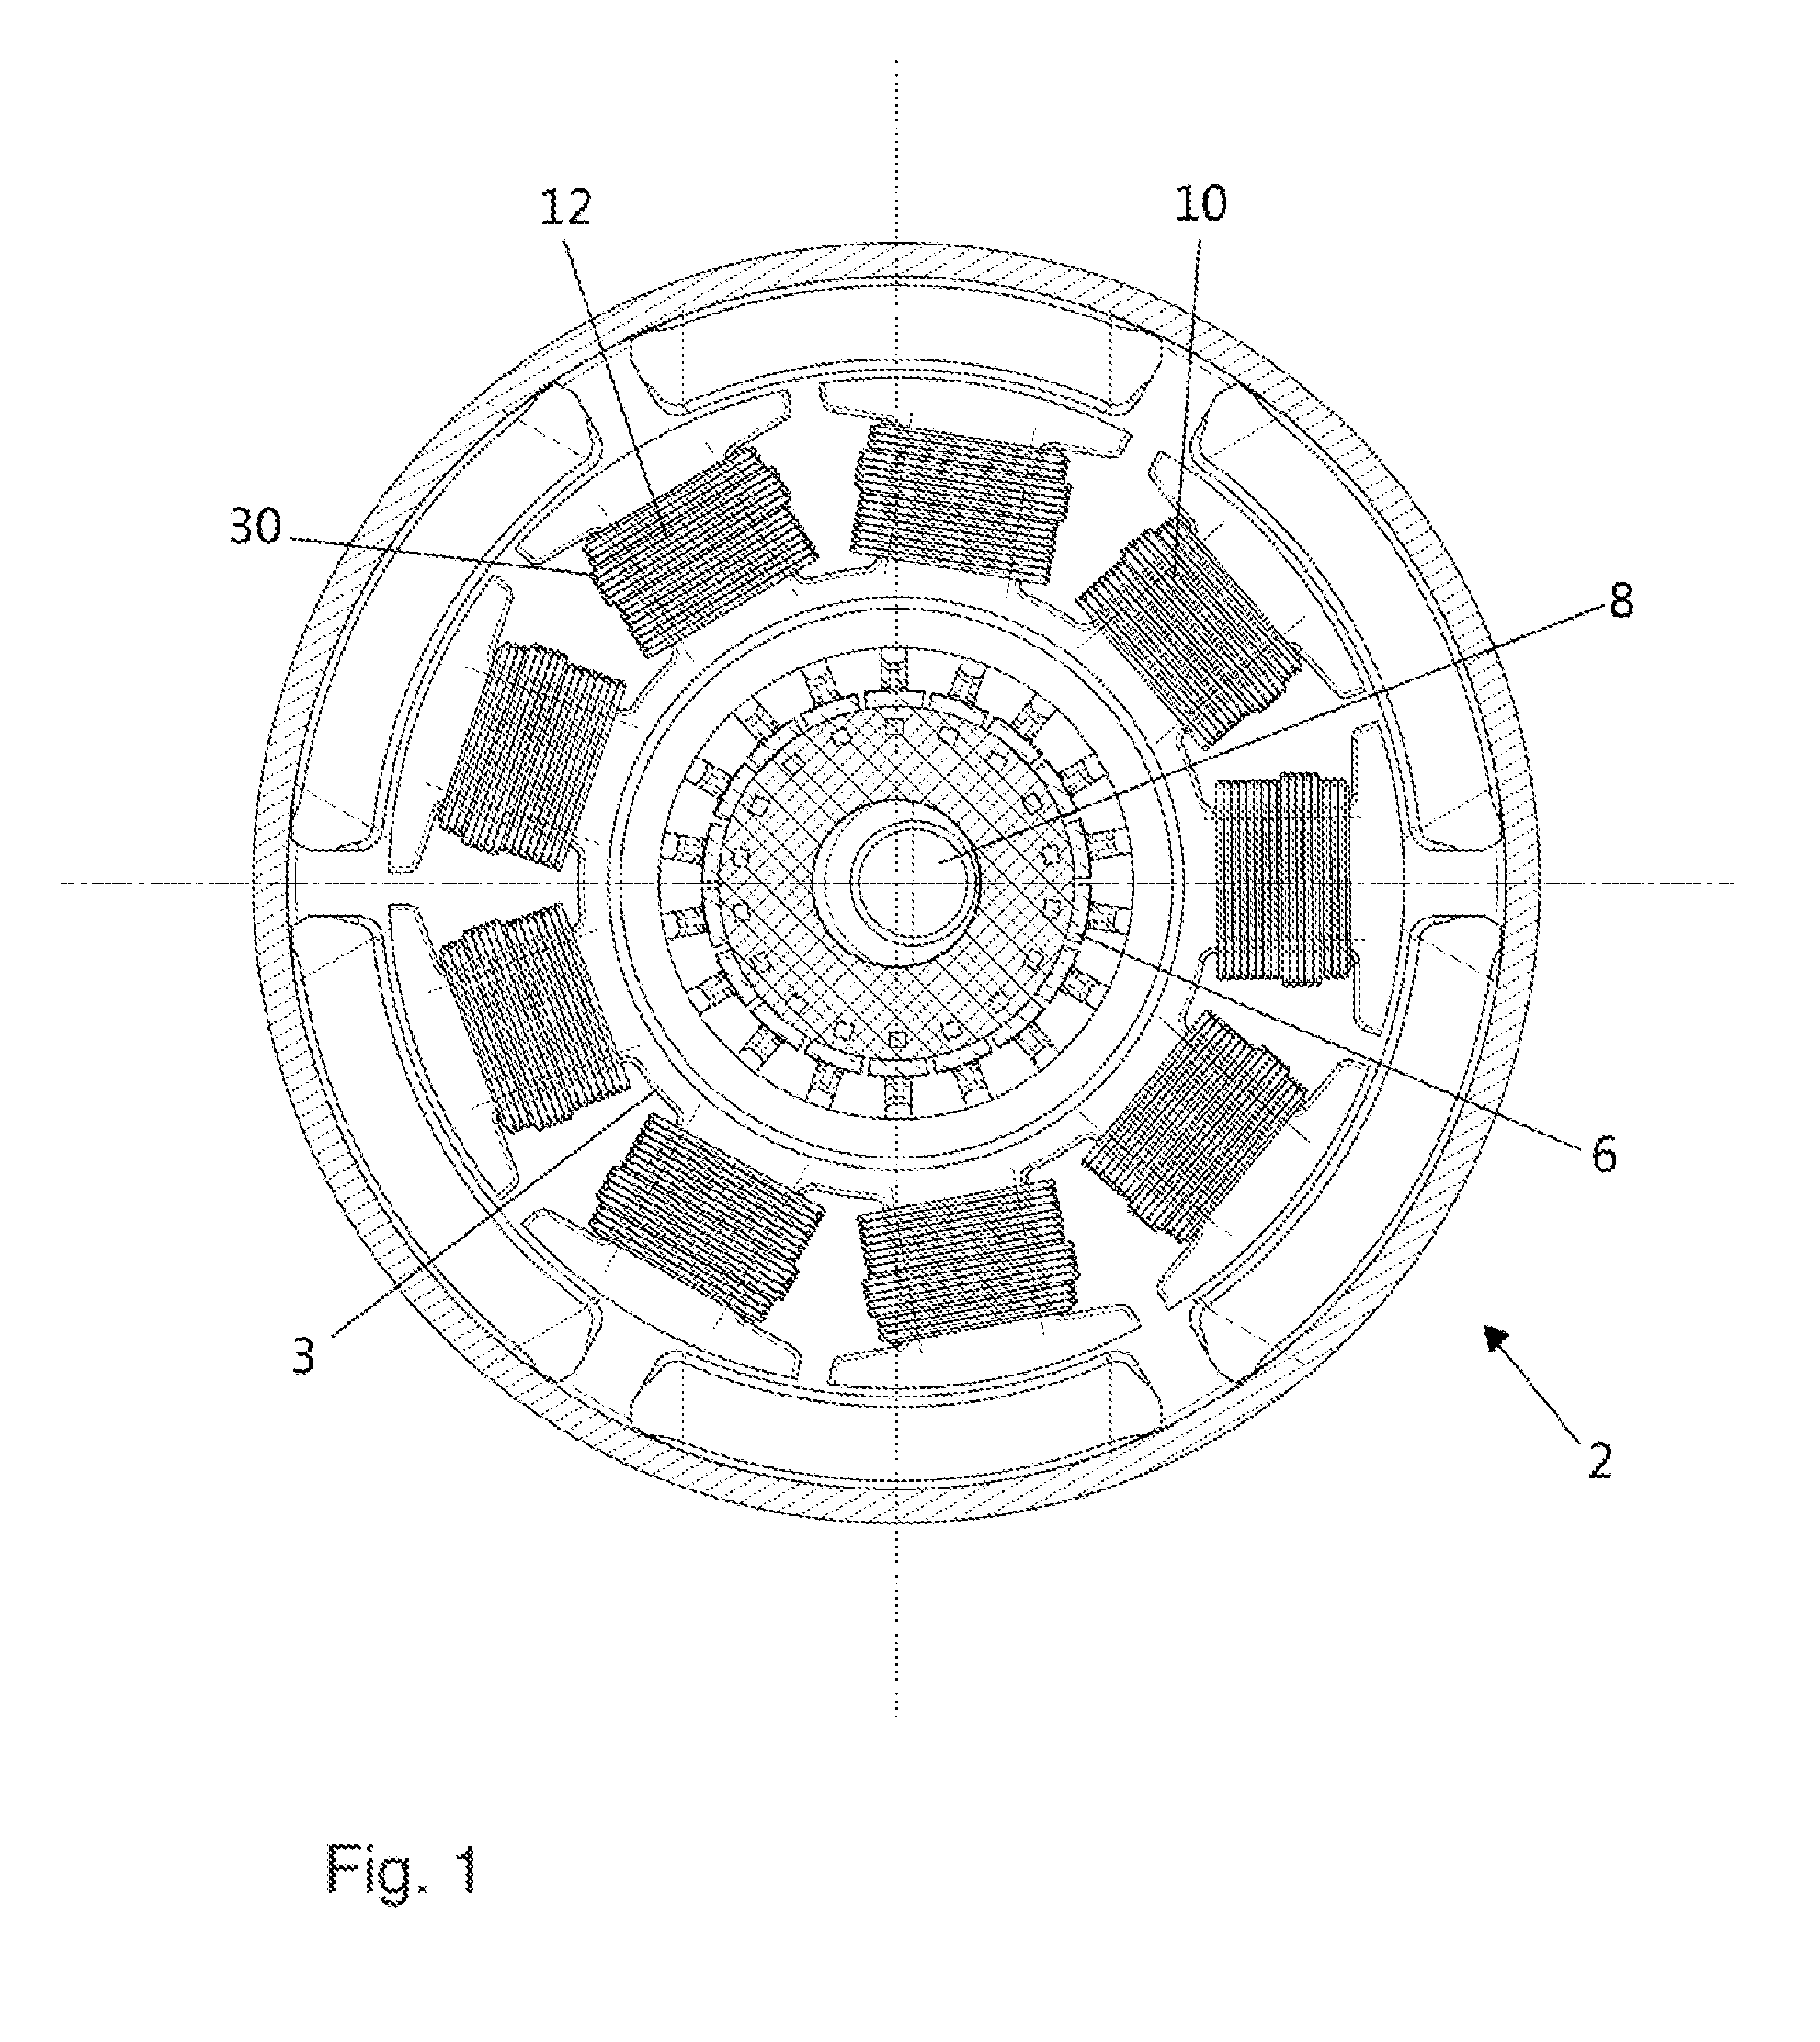 Arrangement of coil wires in a rotor of an electric motor